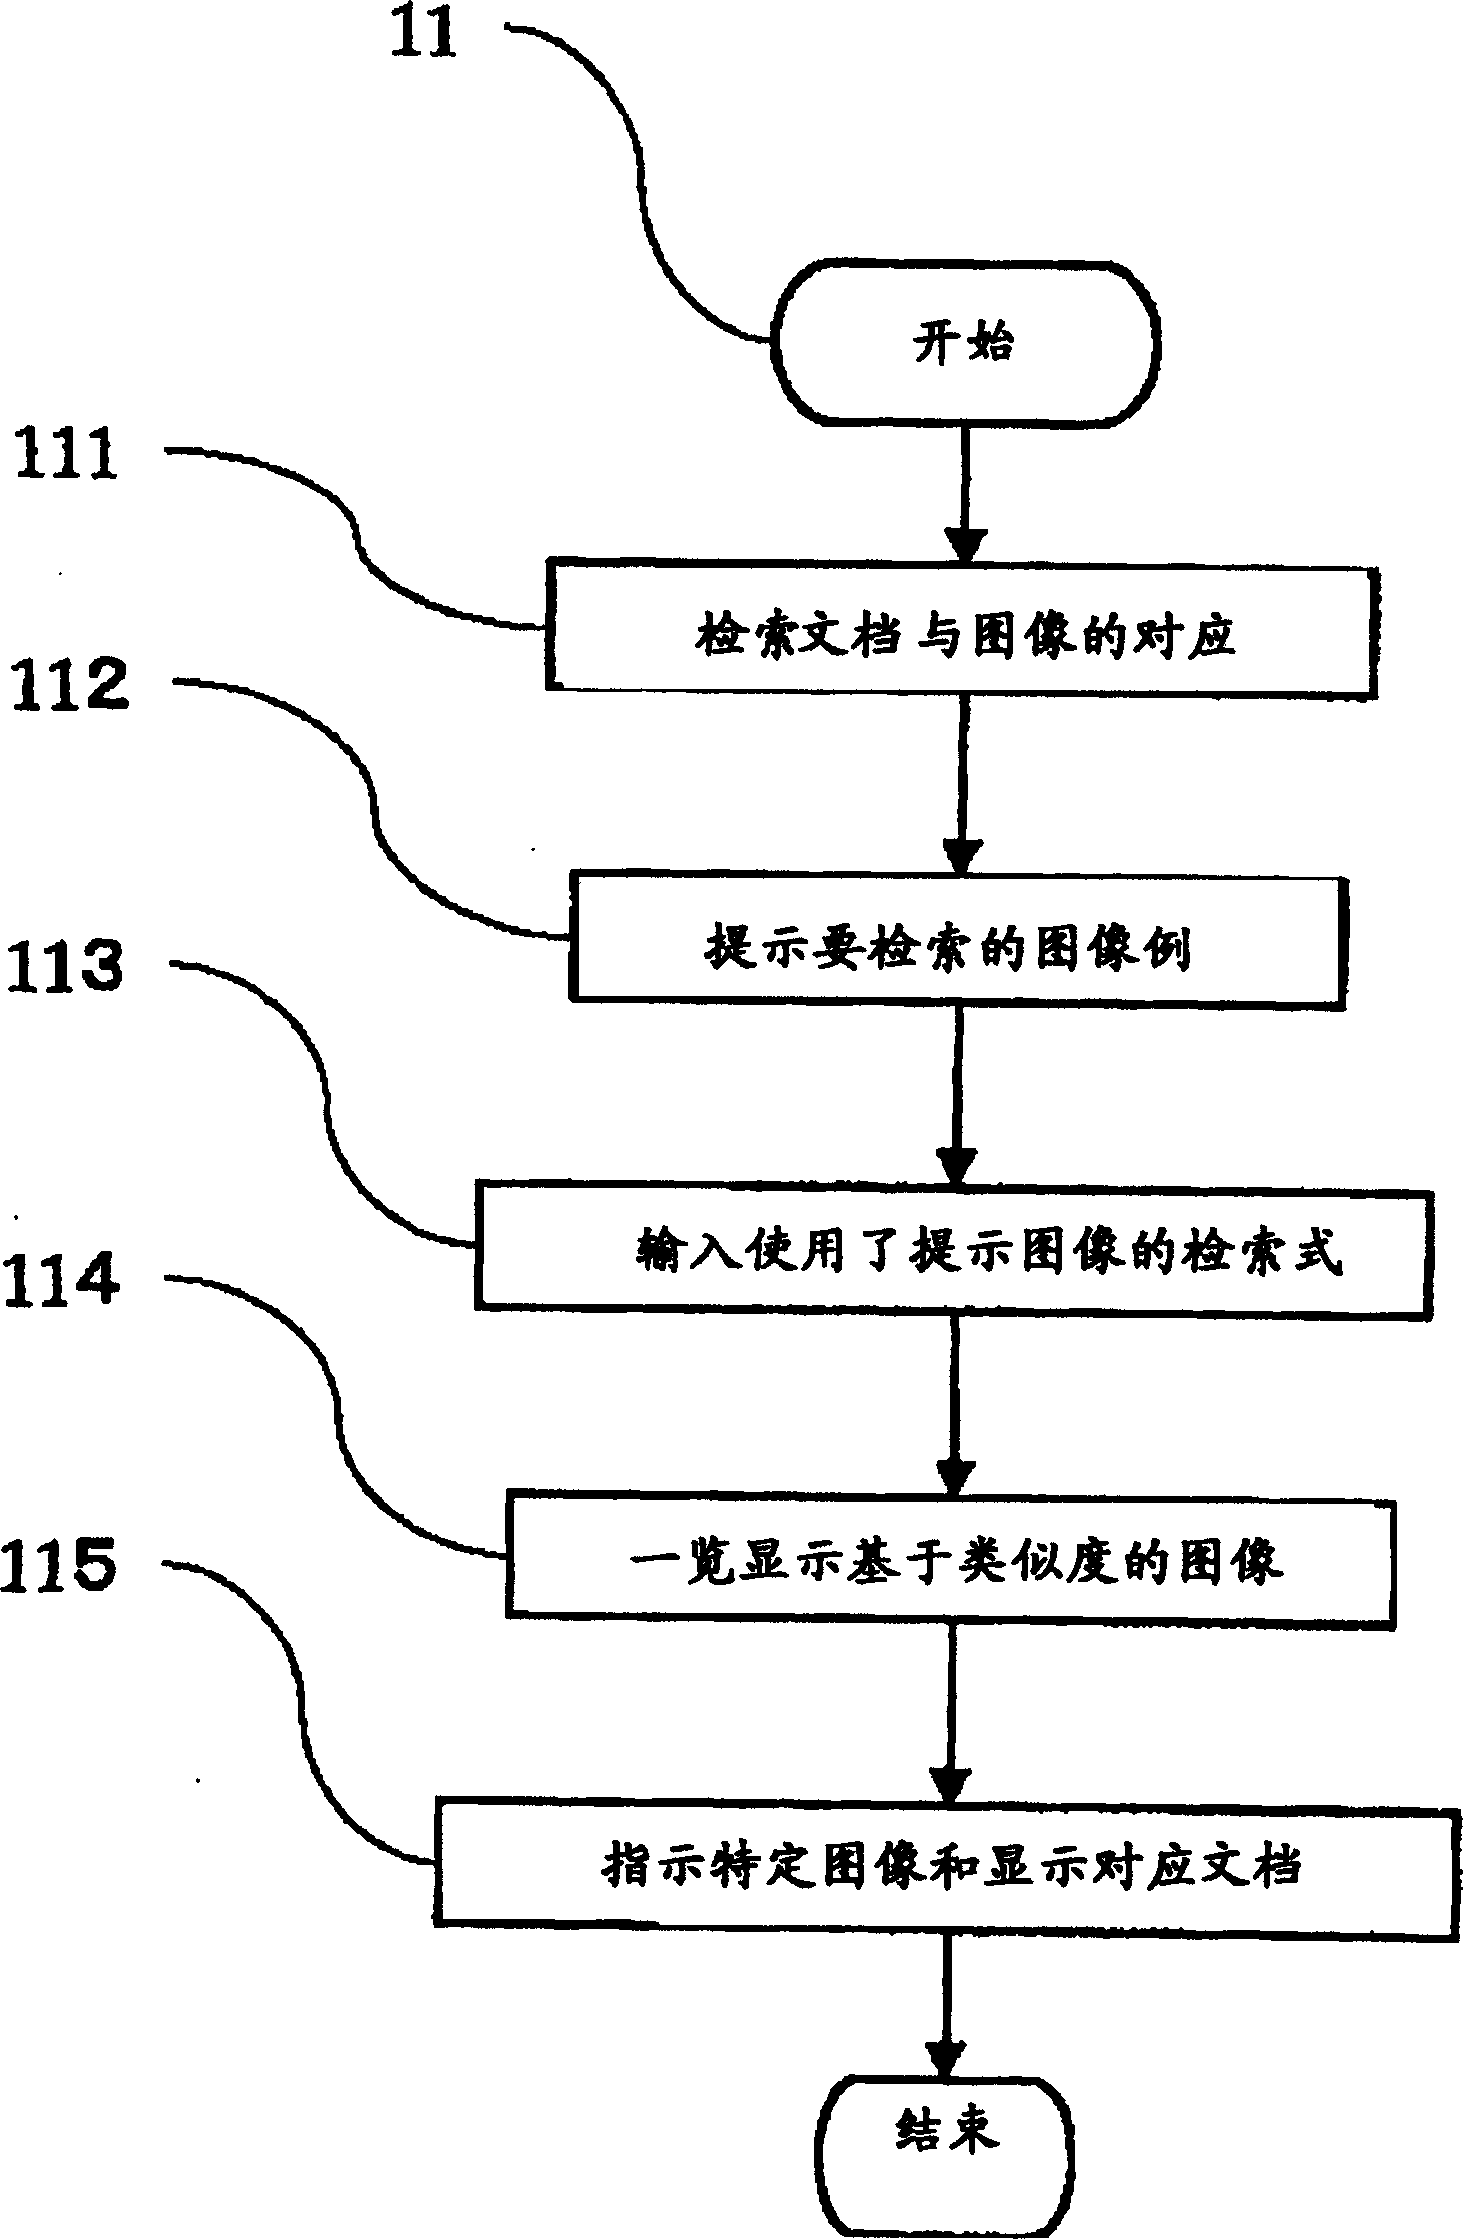 Document retrieval method and apparatus using image contents